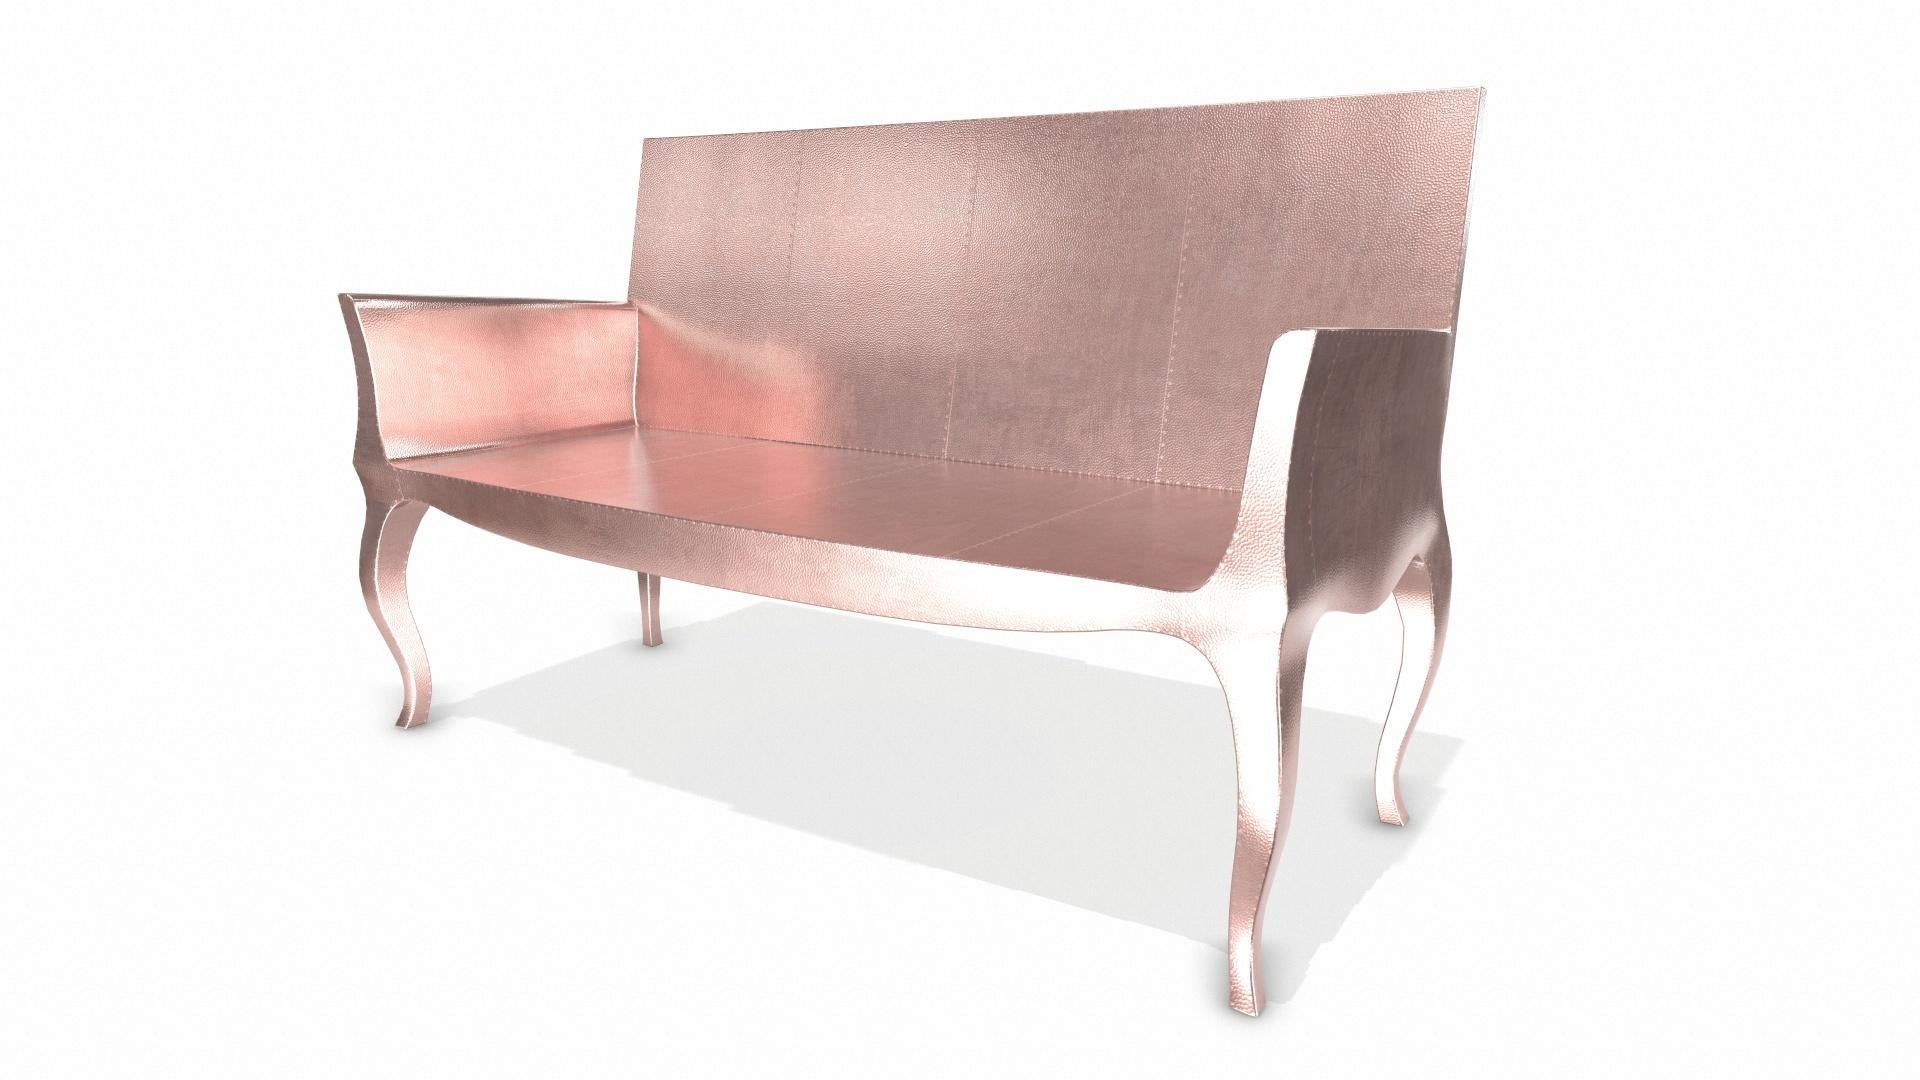 American Louise Settee Art Deco Settees in Mid. Hammered Copper by Paul Mathieu For Sale